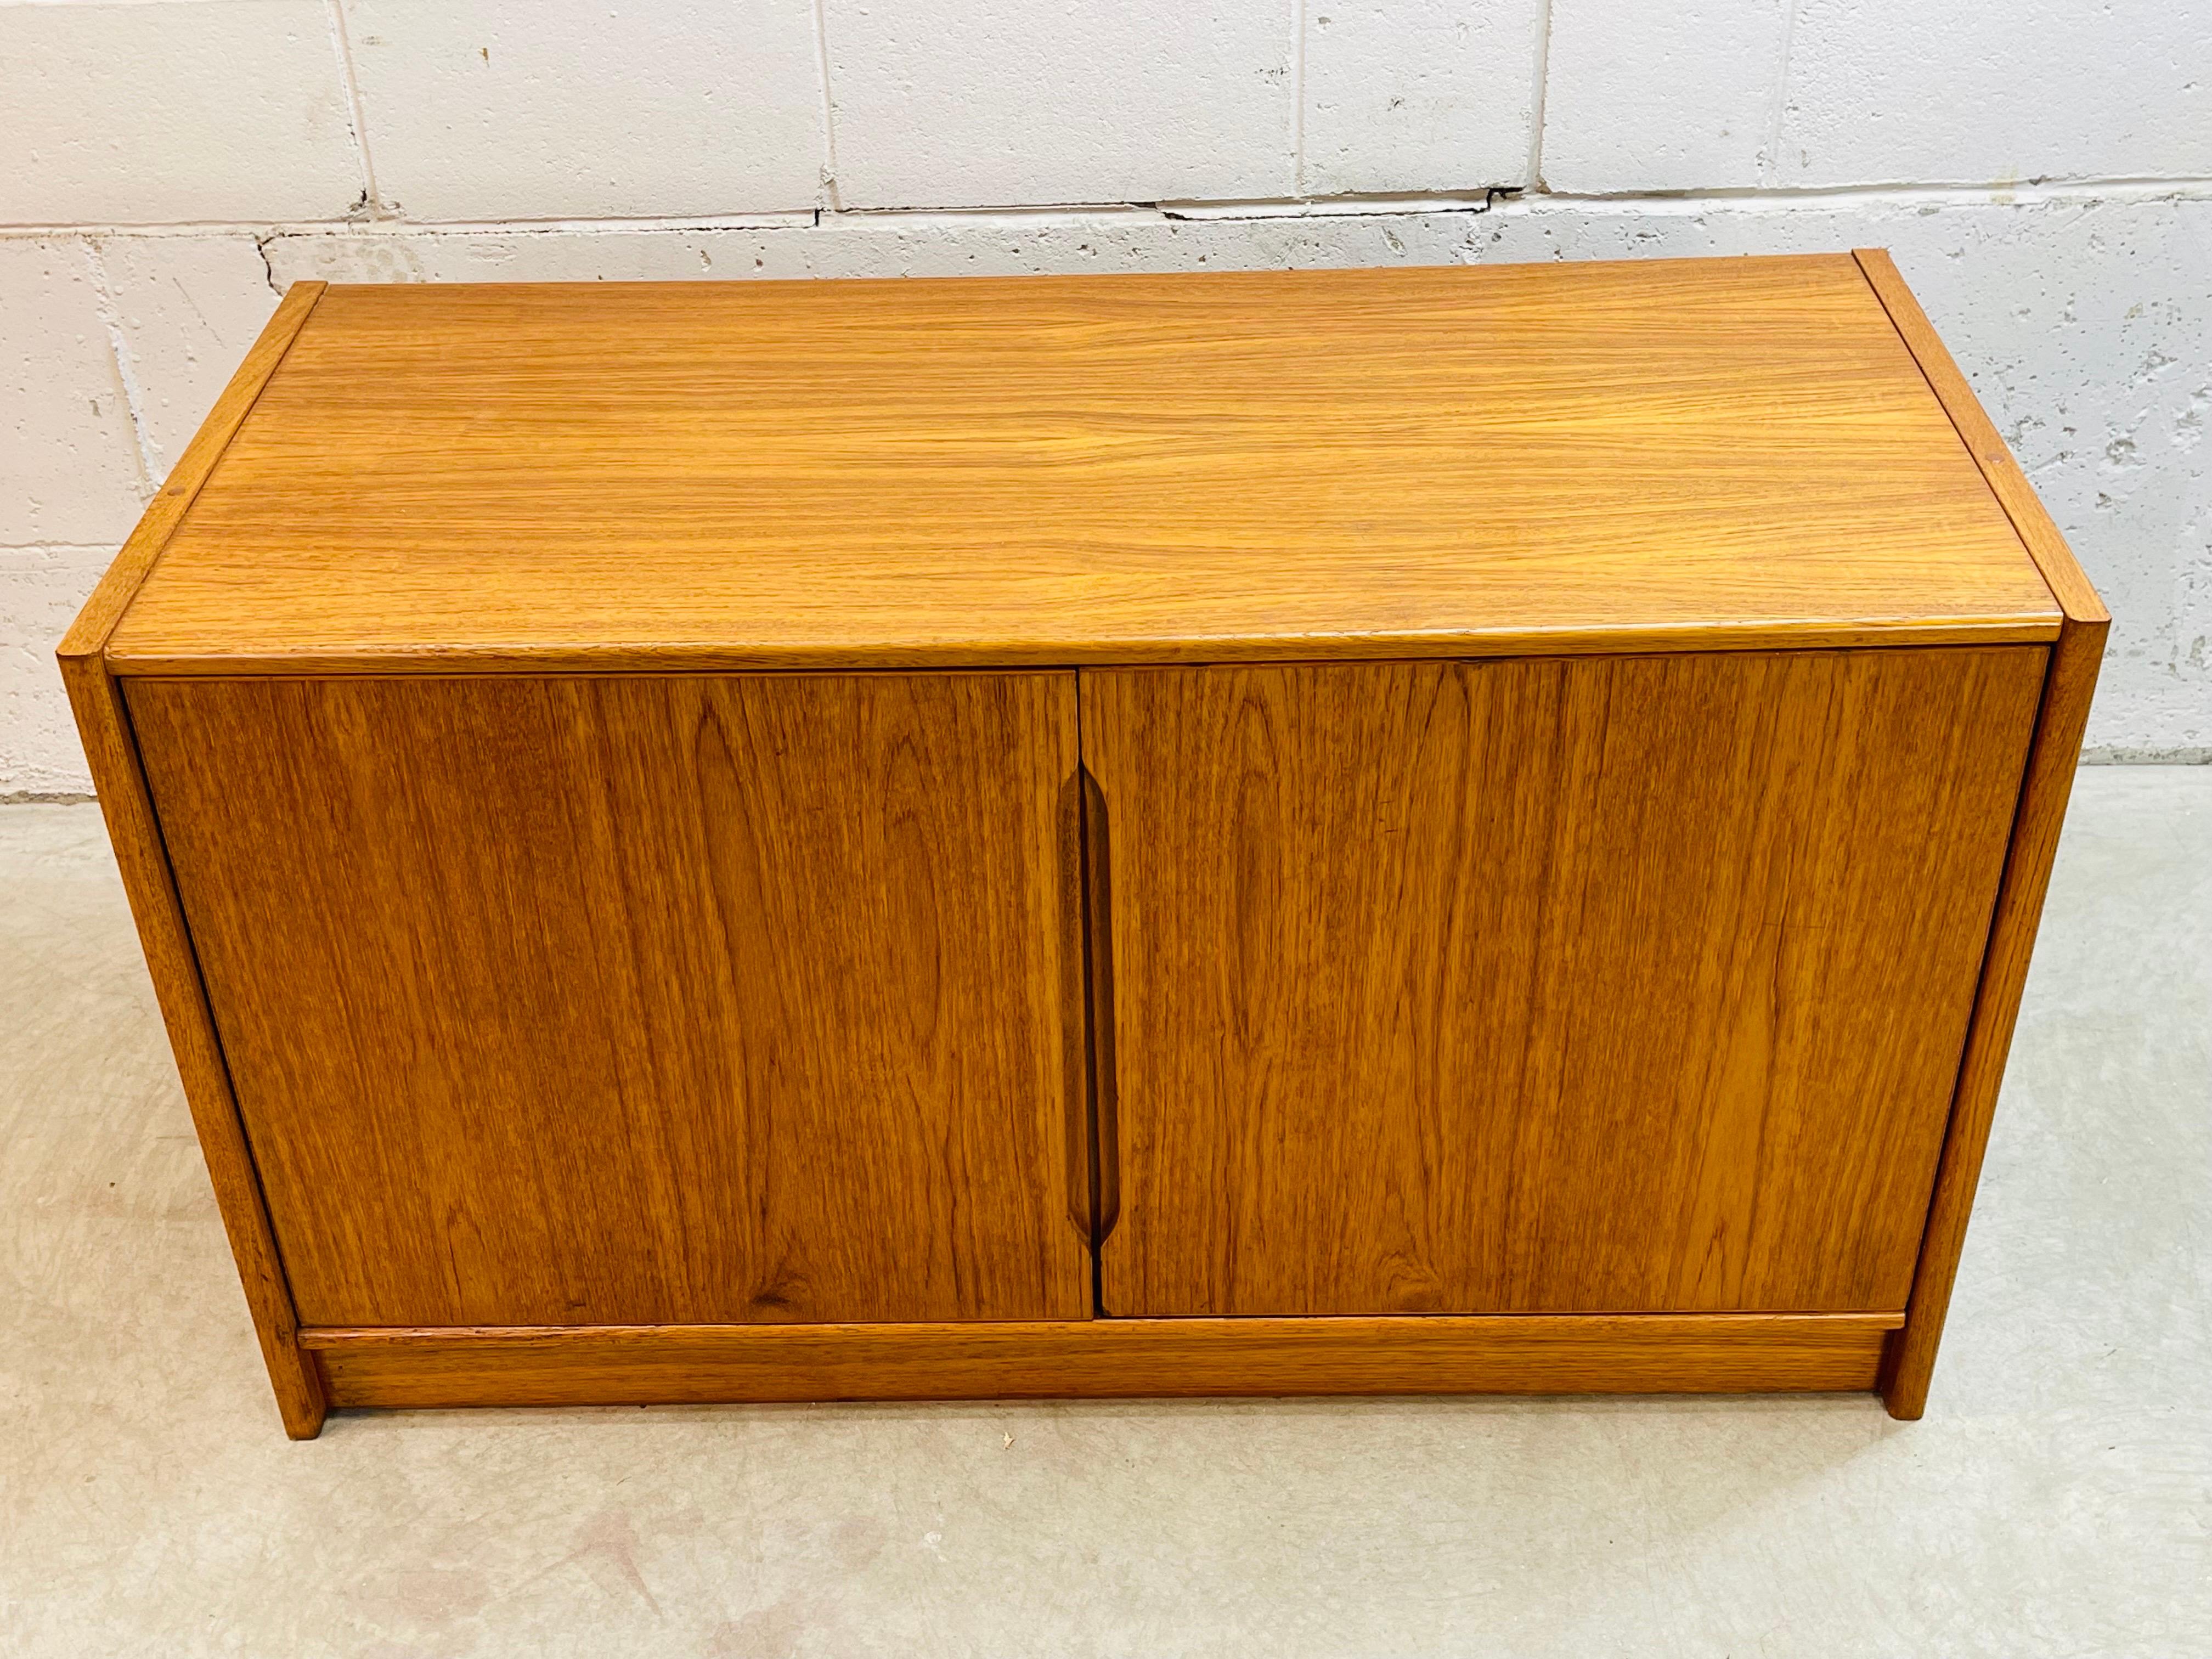 Vintage 1970s Danish teak wood storage cabinet with adjustable shelving. Solid and sturdy with doors that operate perfectly. A large storage cabinet that could hold a sizable TV or entertainment center on top. Newly refinished condition. Marked on